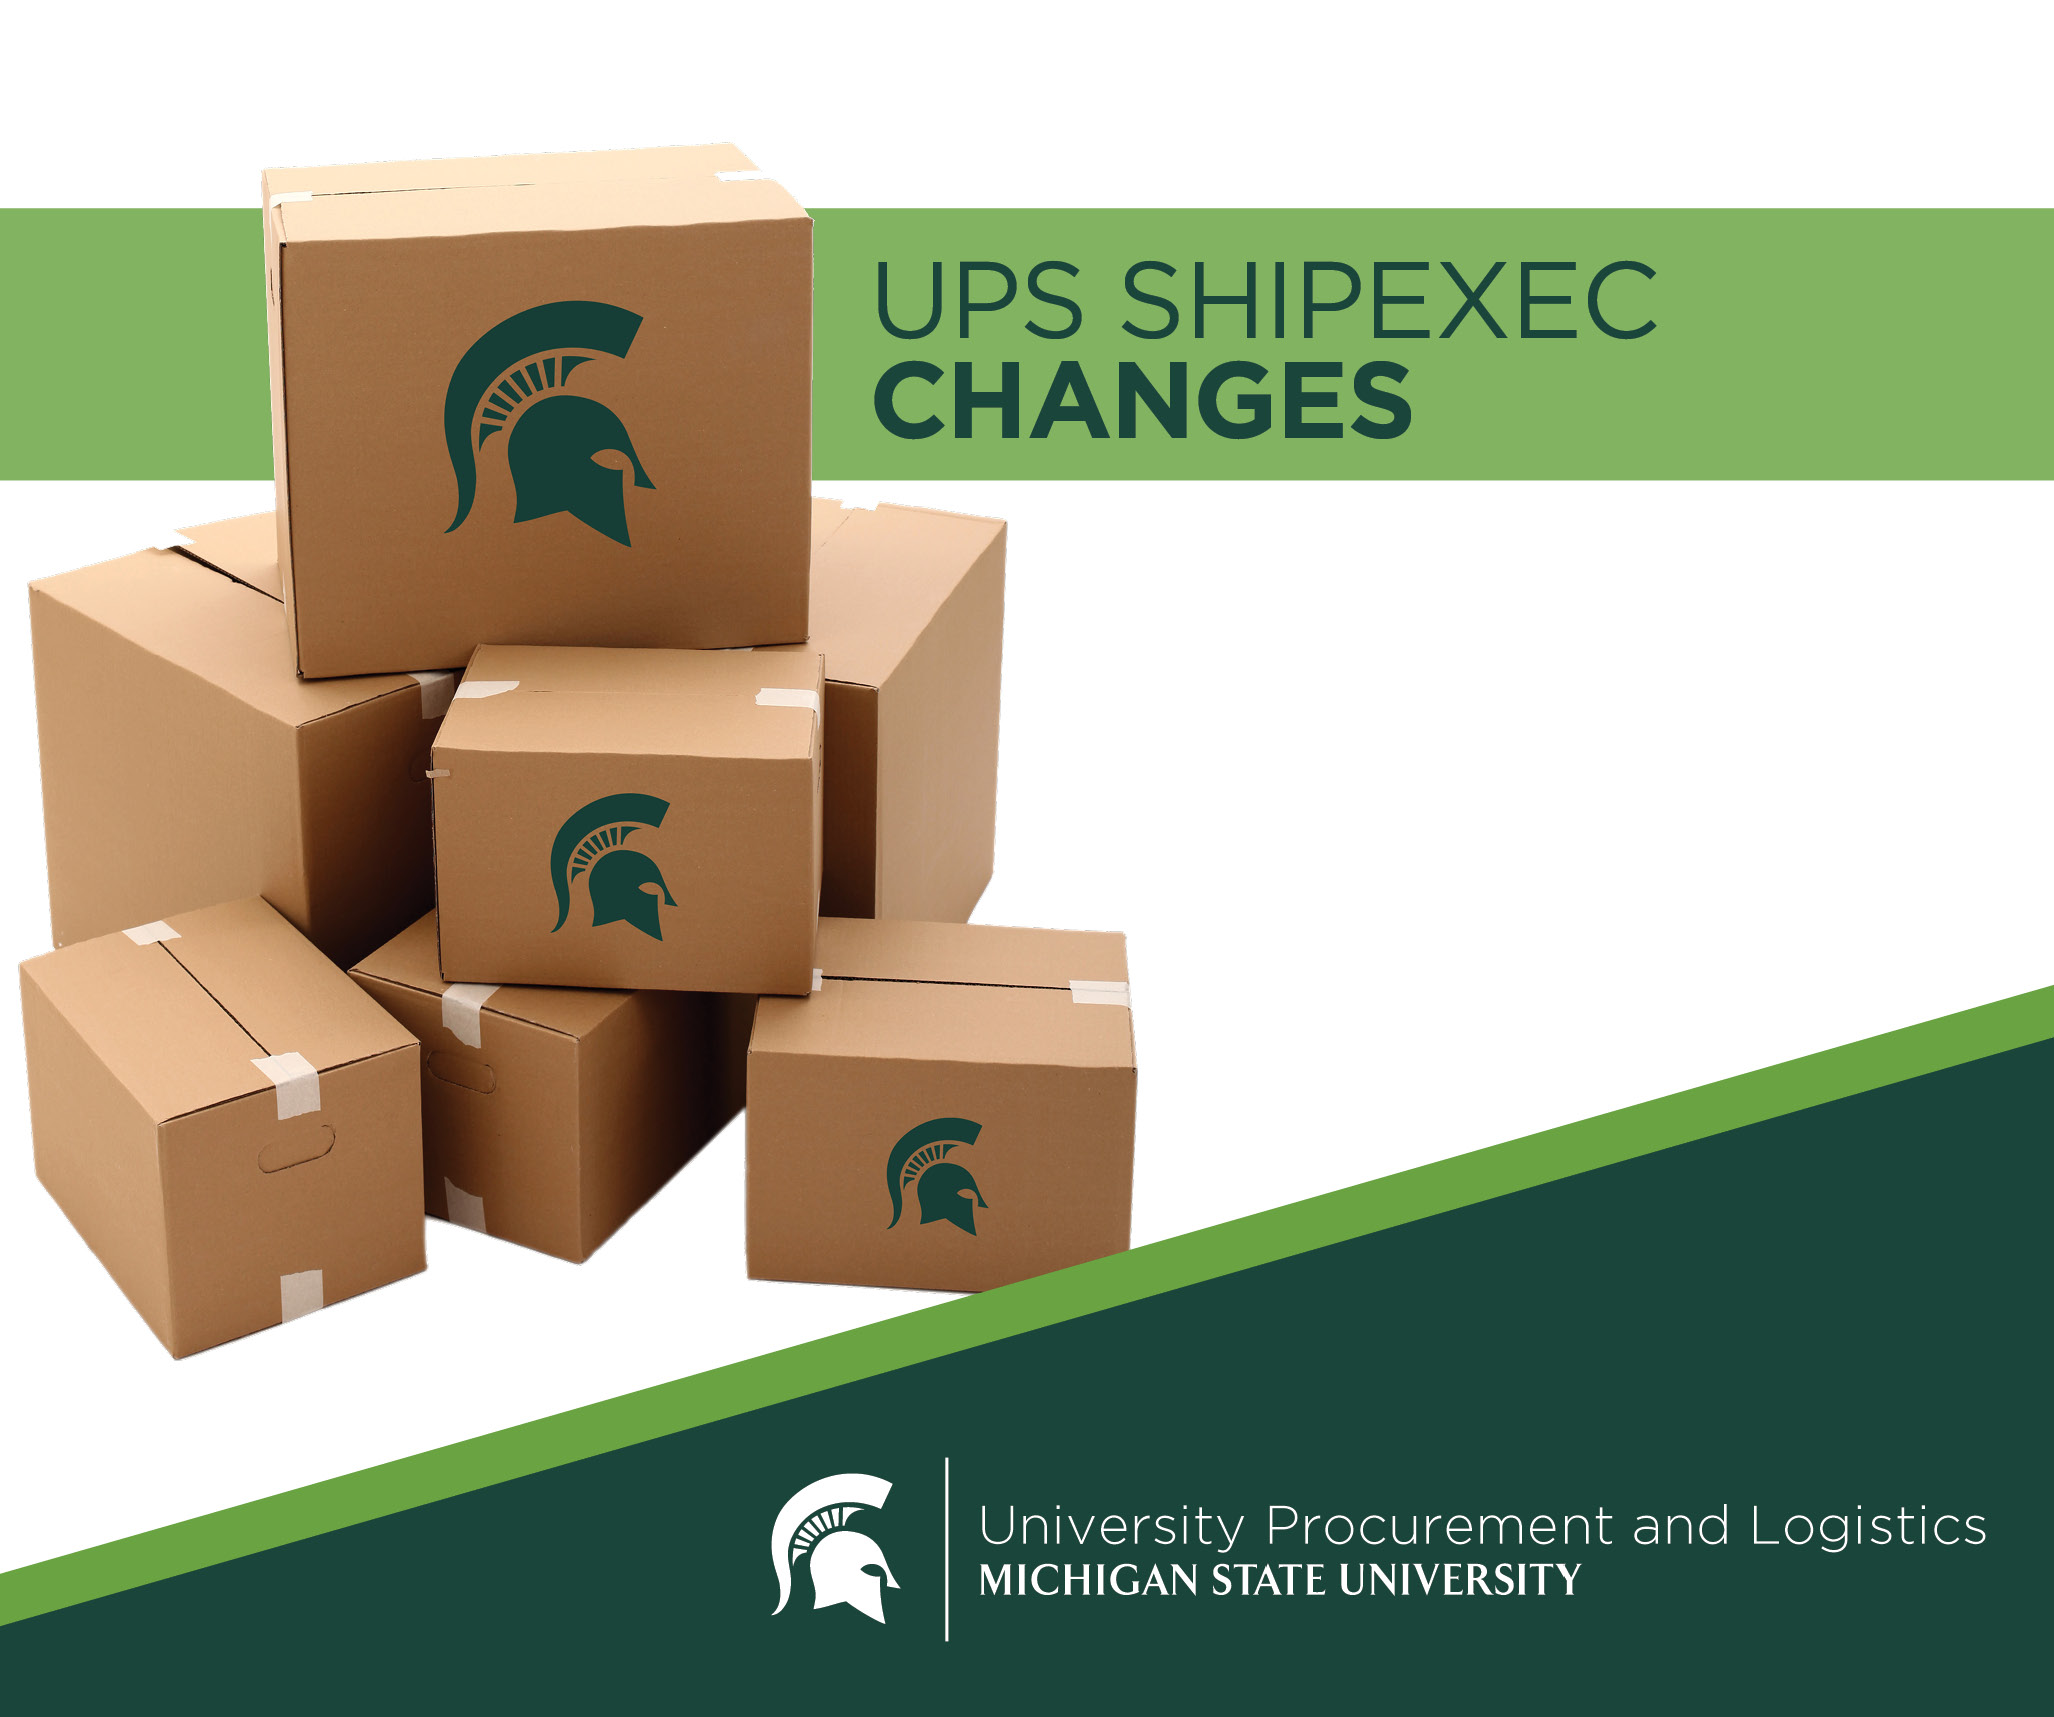 An image of a stack of cardboard boxes with the MSU spartan helmet logo on the side of the boxes. A heading banner states " UPS ShipExec changes." The UPL signature logo is displayed in the bottom right corner over a green background. 